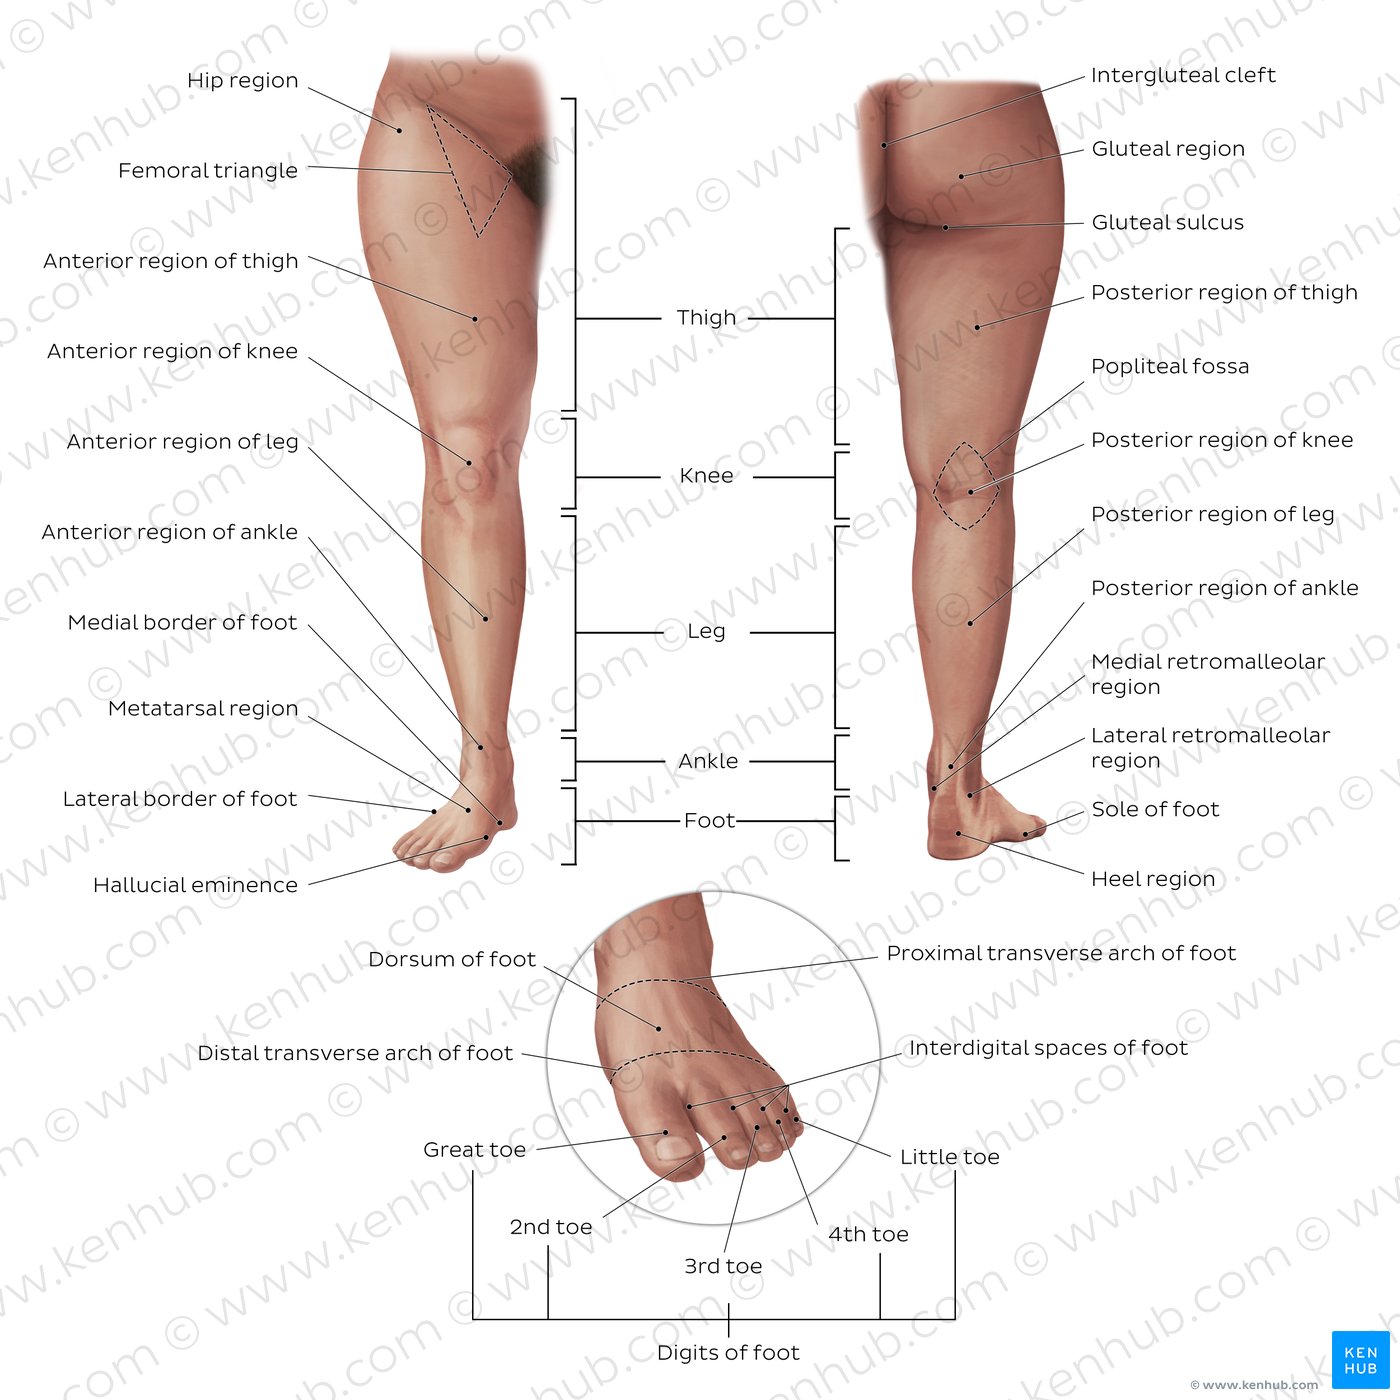 Regions of the lower limb: Anatomy and contents